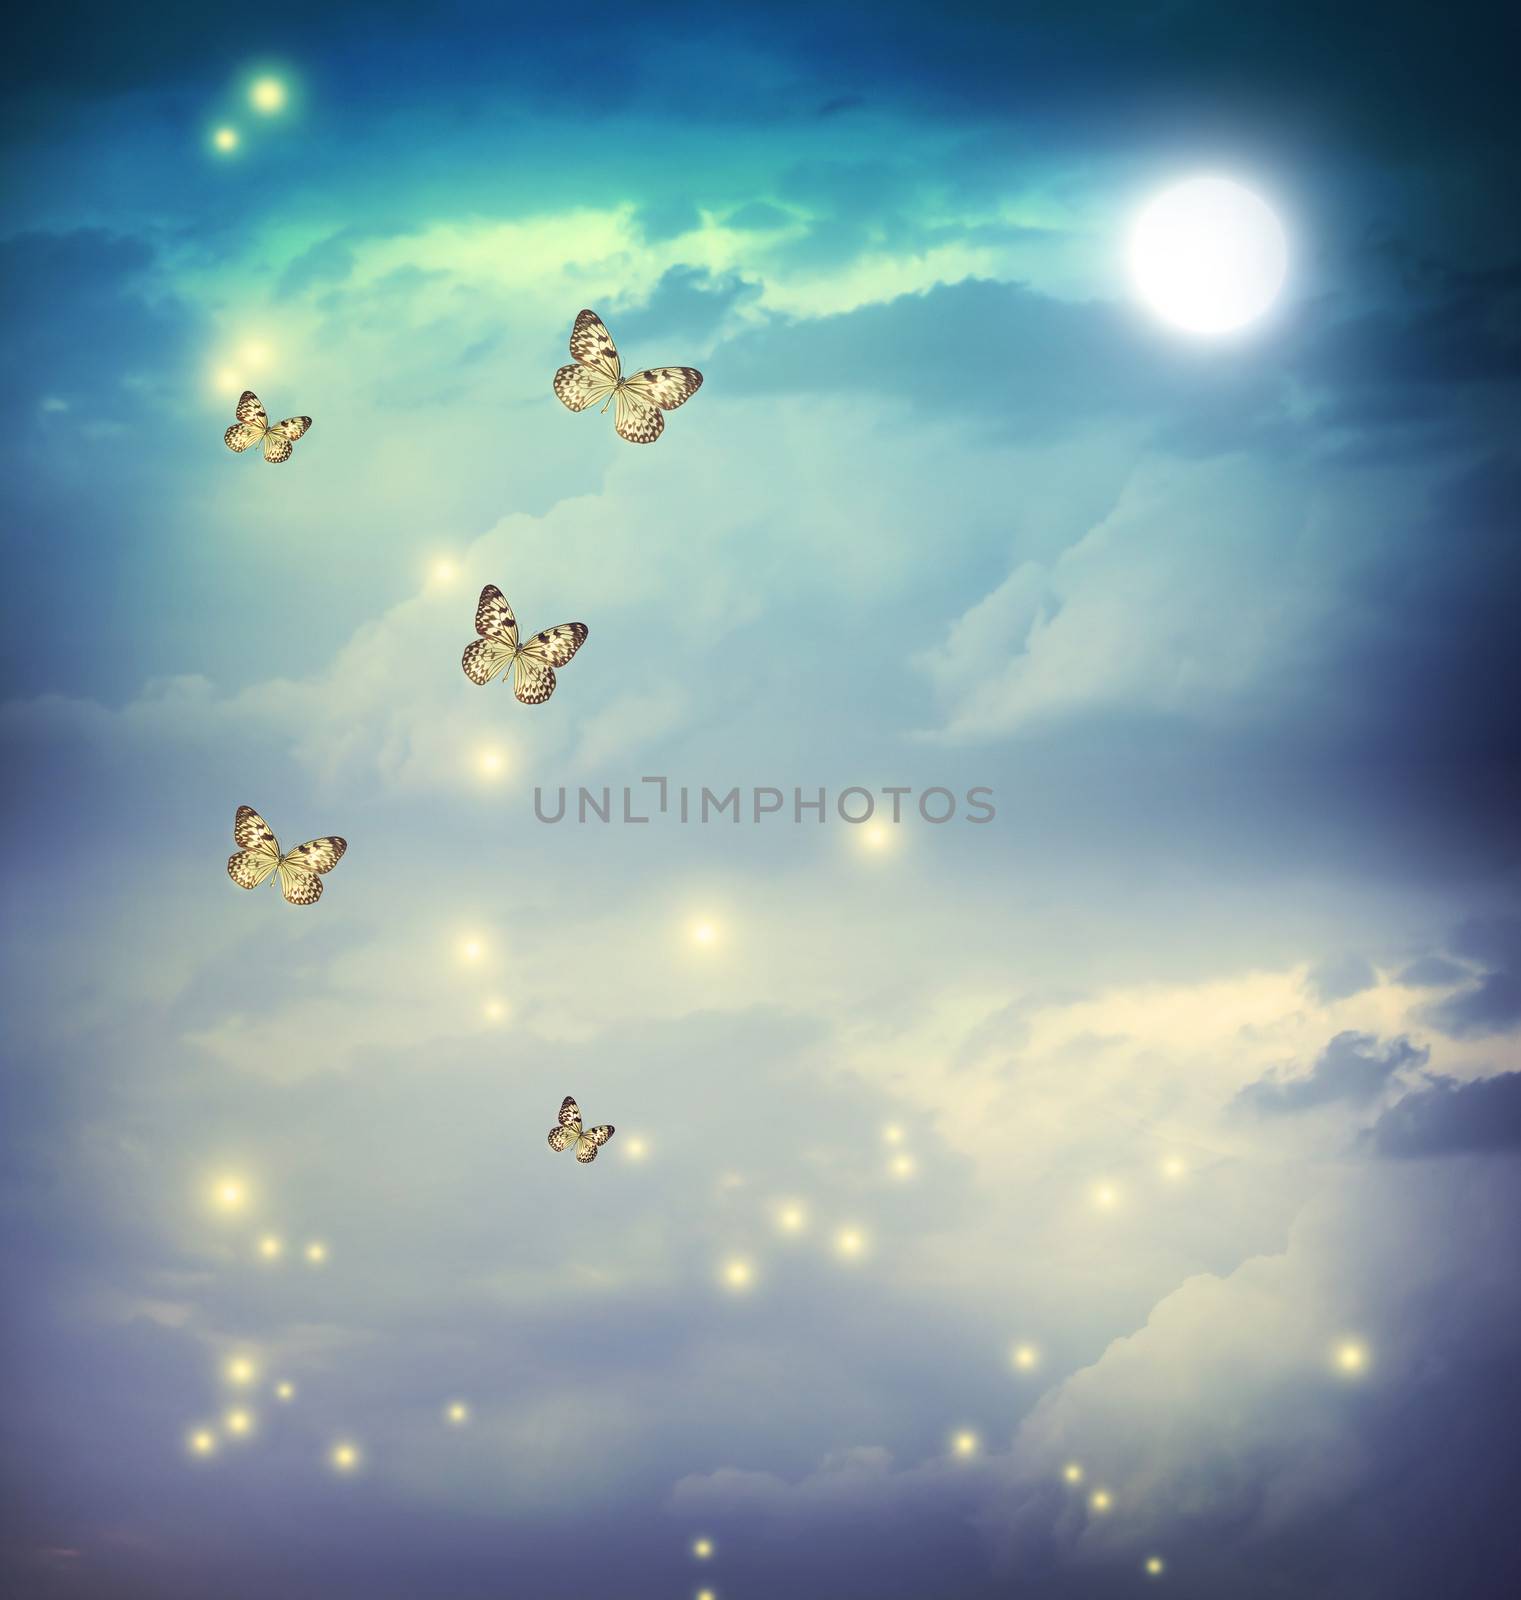 Butterflies in a fantasy night landscape with stars and moon